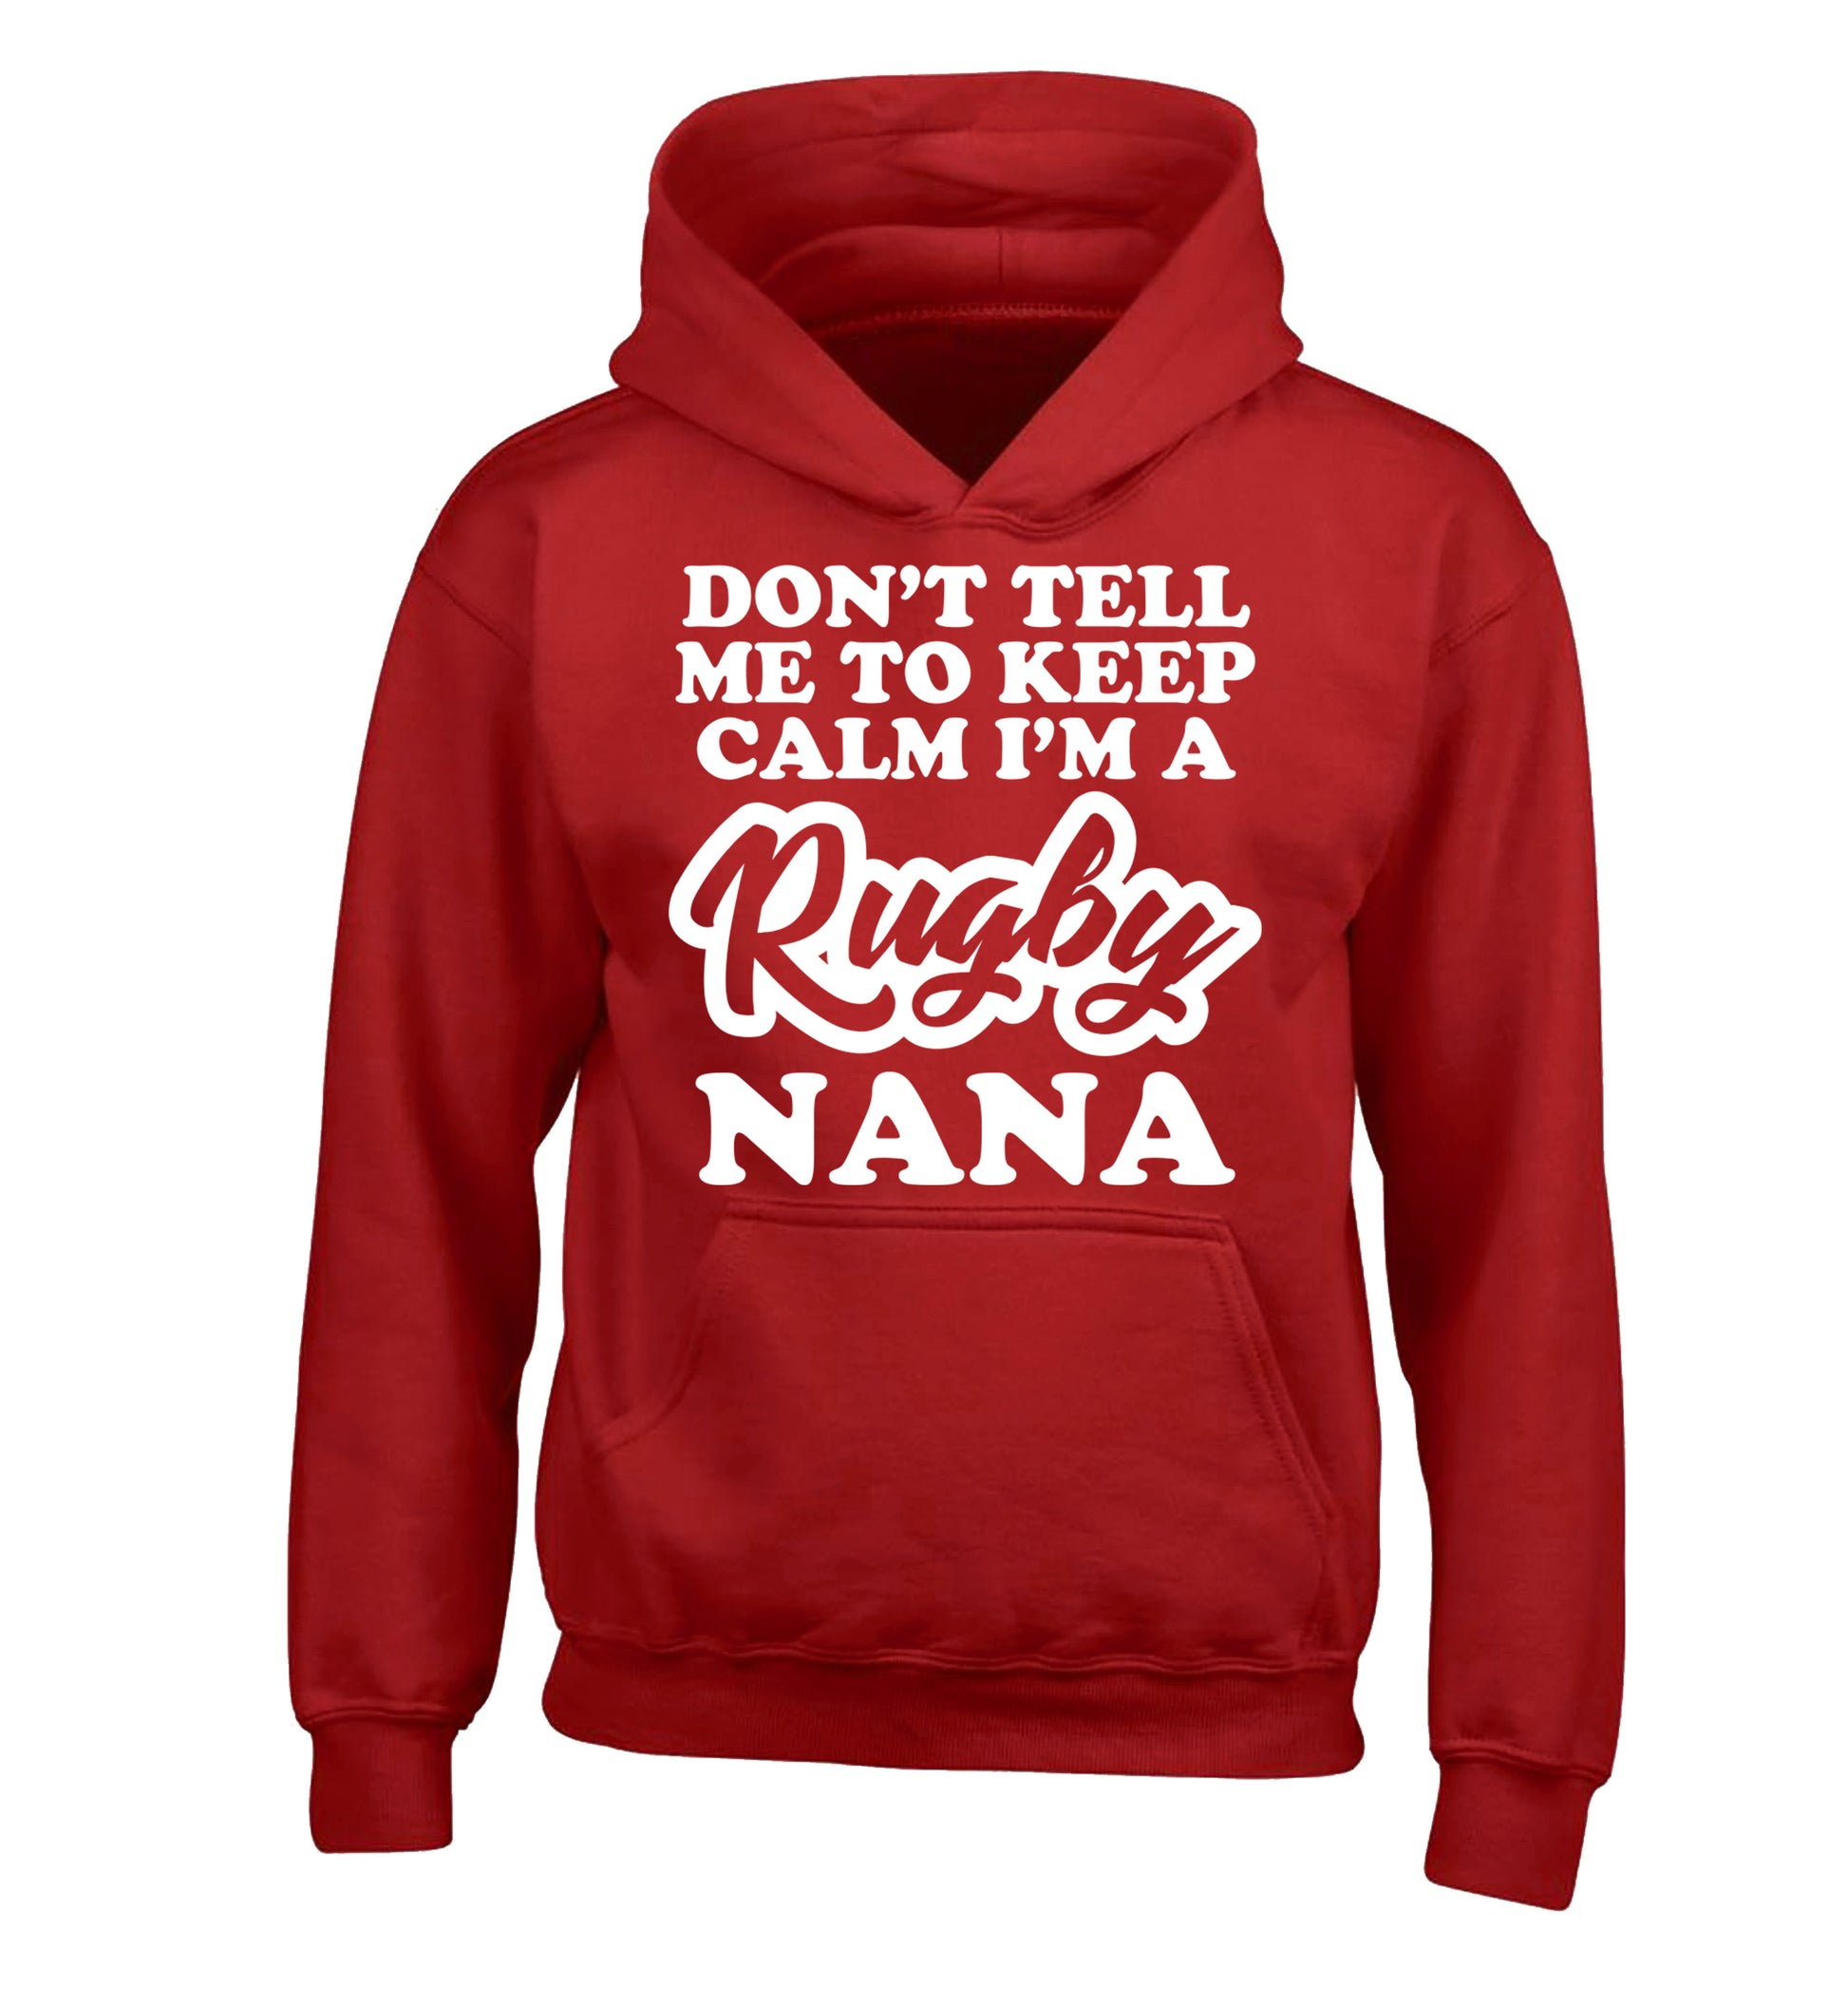 Don't tell me to keep calm I'm a rugby nana children's red hoodie 12-13 Years